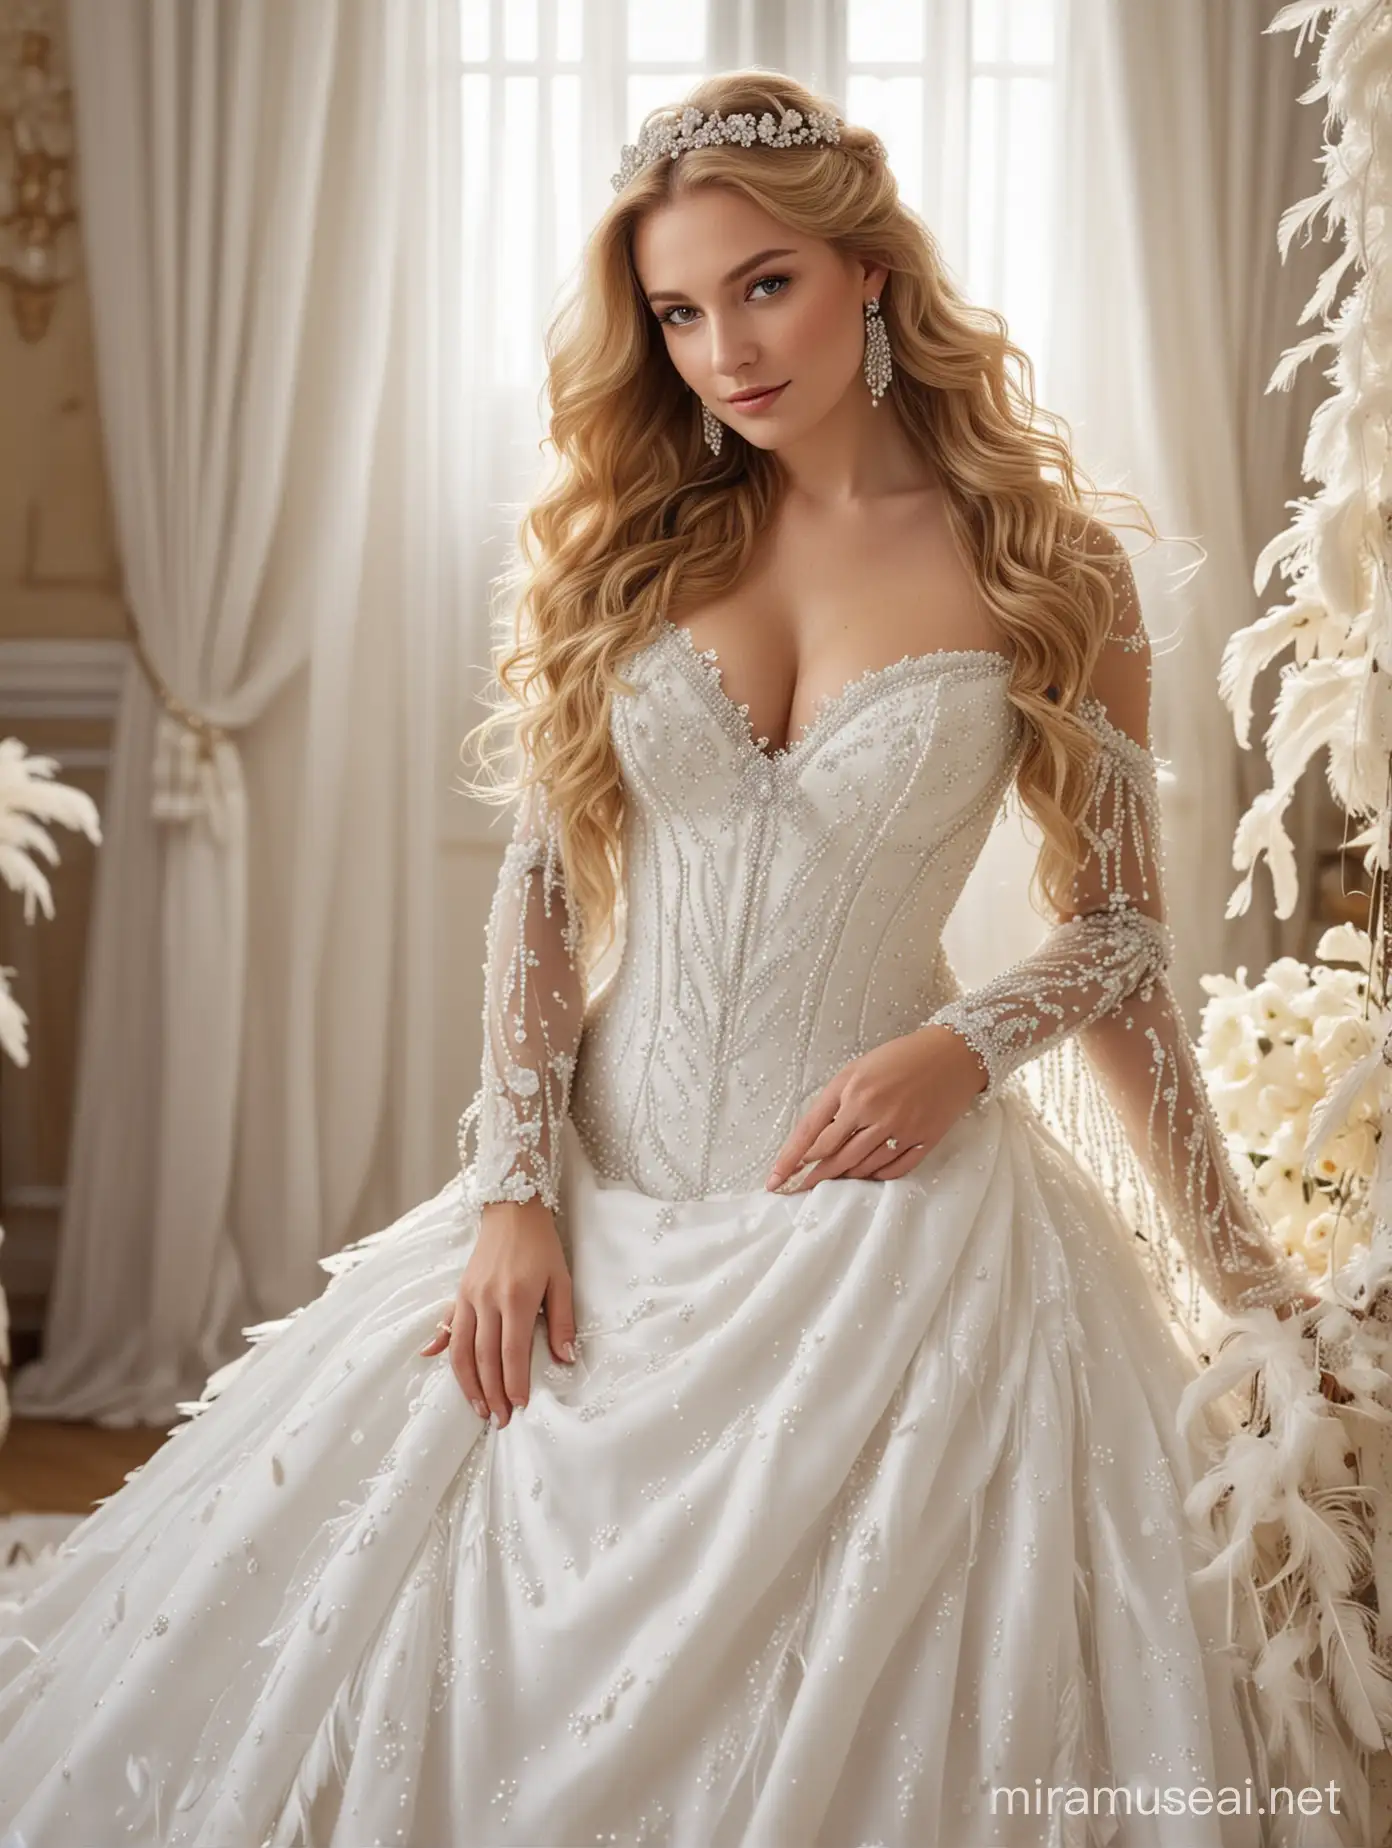 GoldenHaired Bride in Ornate Wedding Gown with Feathers and Pearls